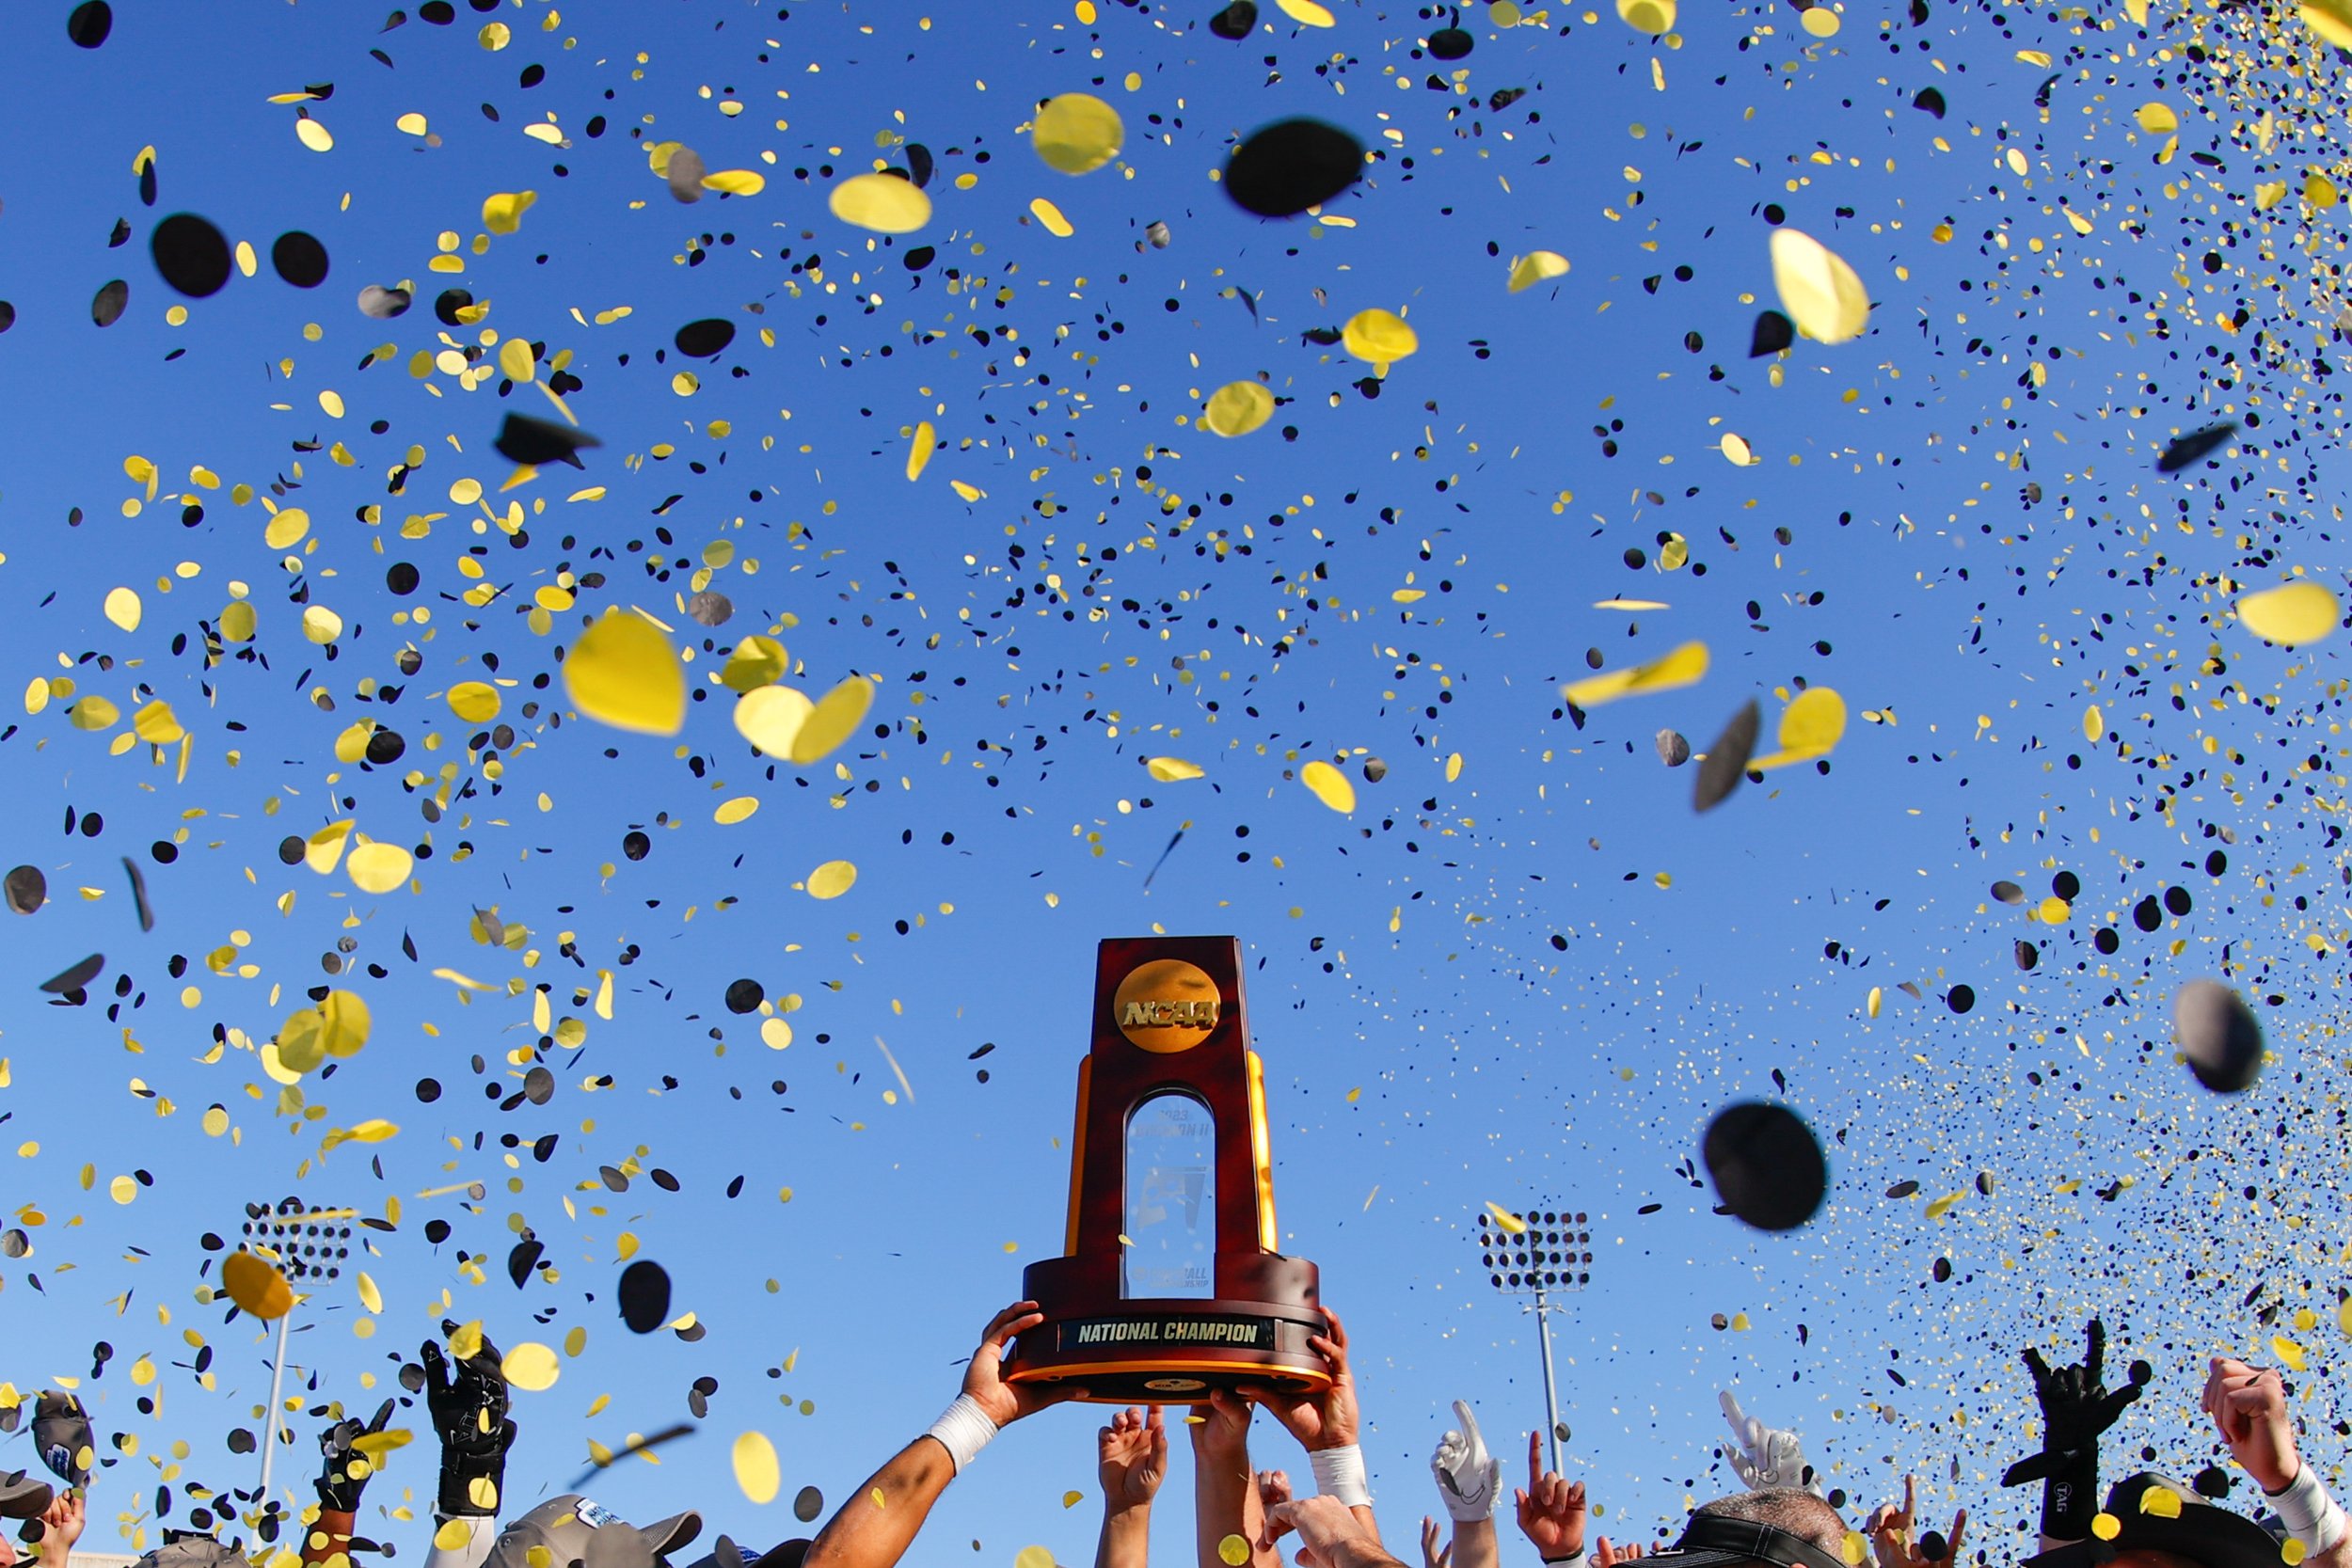  MCKINNEY, TEXAS - DECEMBER 16: EDITORS NOTE: image has been taken with a fisheye lens) The national champion trophy is seen after the Harding Bisons defeating the Colorado School of Mines Orediggers during the Division II Football Championship held 